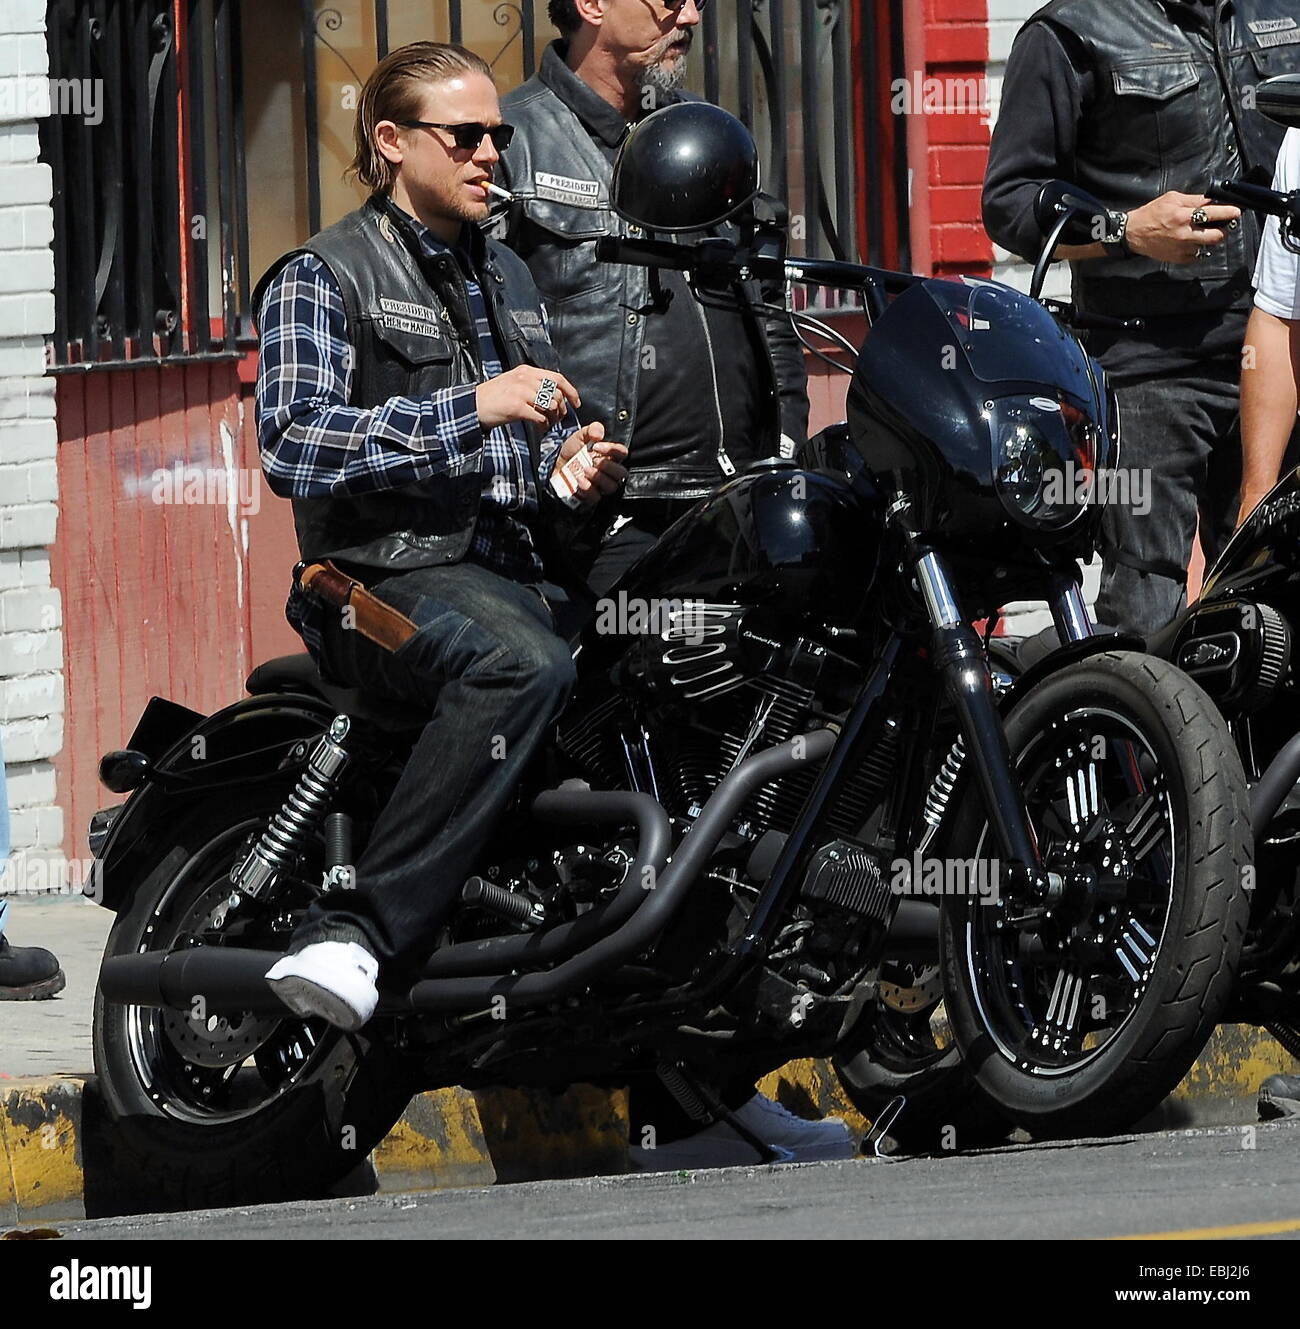 Charlie Hunnam hops on his bike on the set of 'Sons Of Anarchy' after taking time off to film his new movie Crimson Peak in Canada. The uk actor was seen fooling around with the rest of the cast as they film the last season to their hit biker show.  Featu Stock Photo